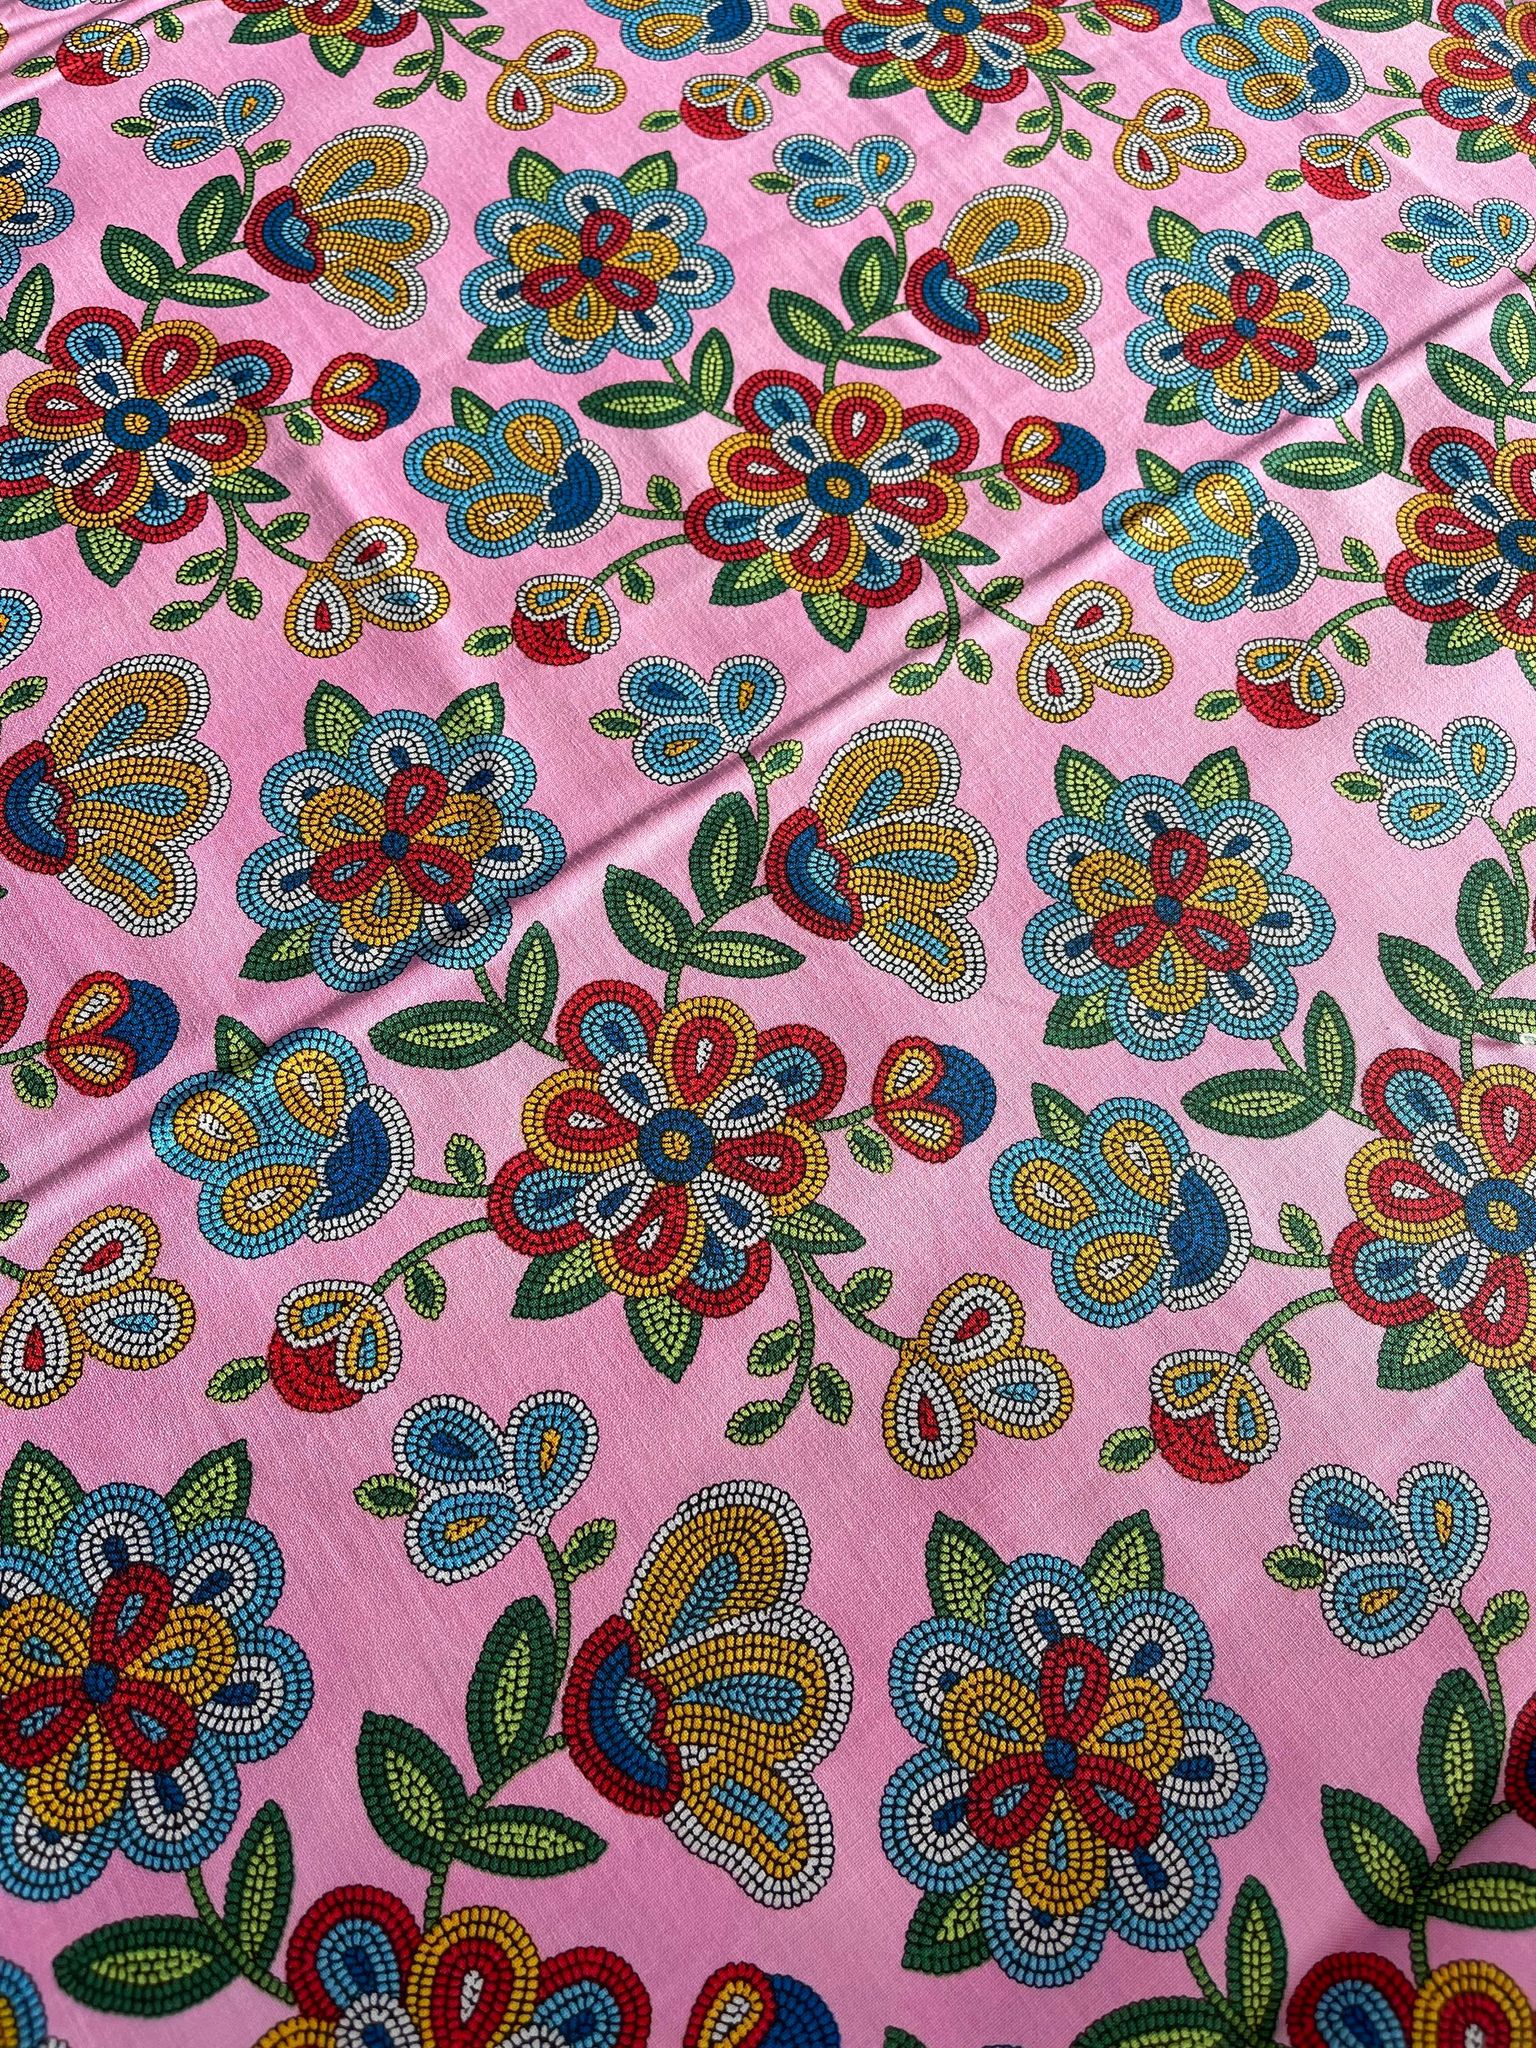 Pink Tucson Beaded Floral Design Cotton Fabric